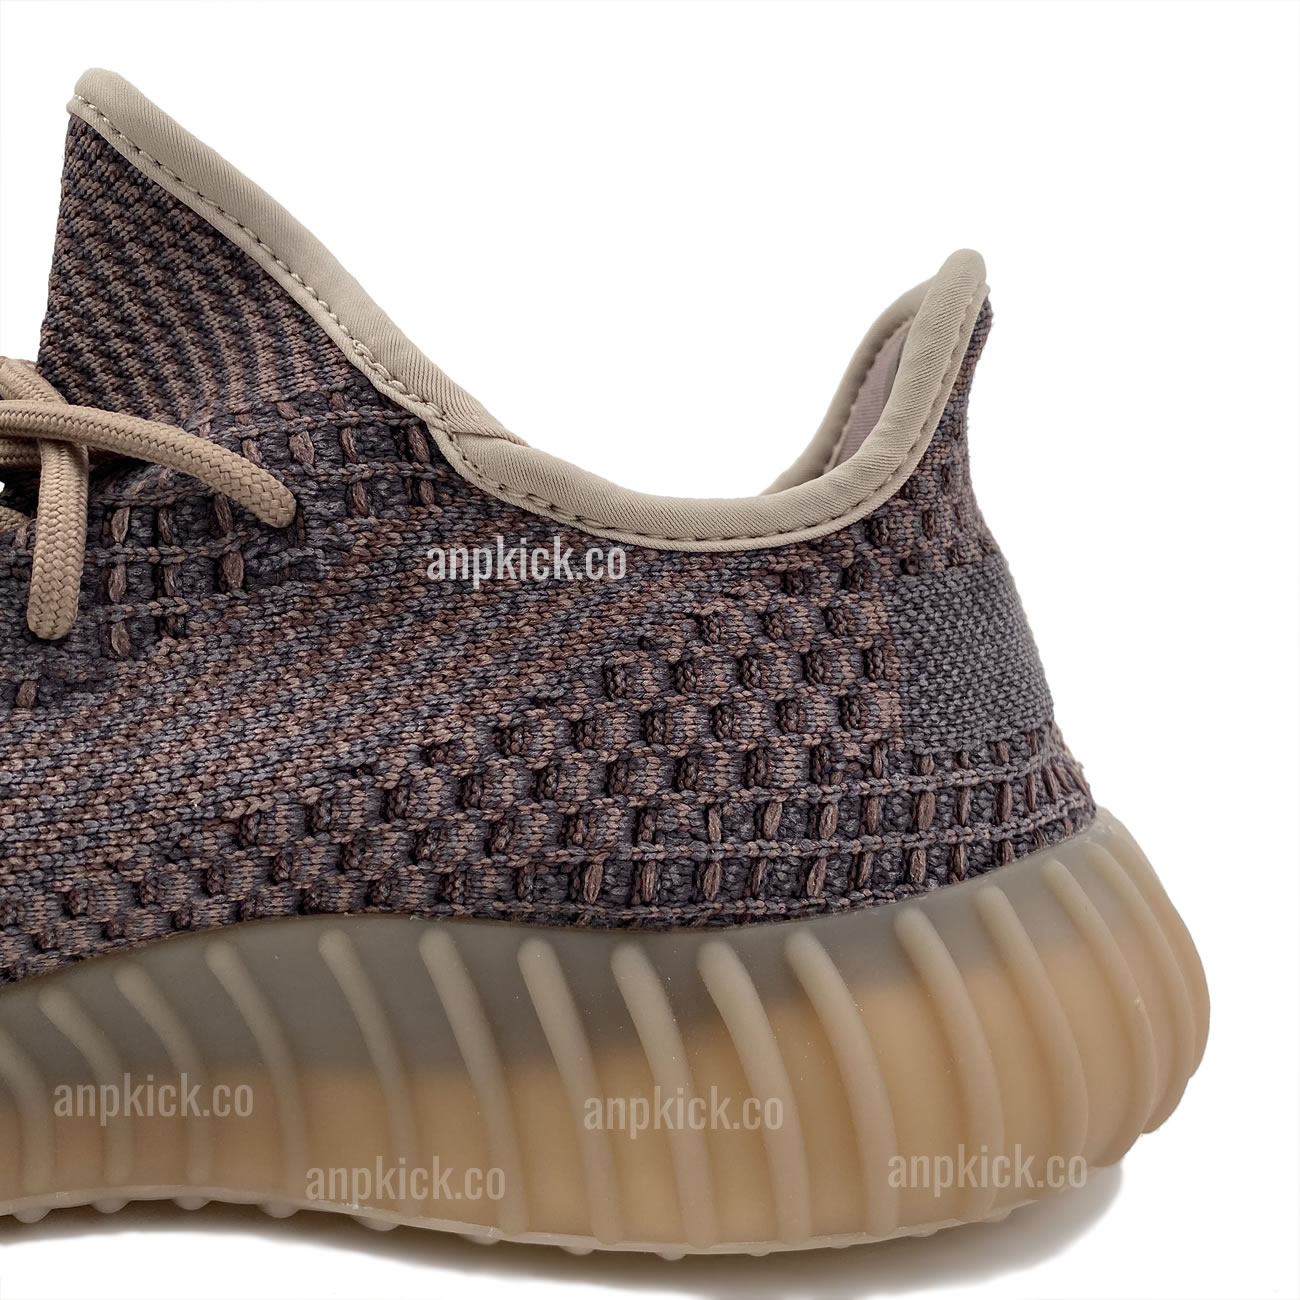 Adidas Yeezy Boost 350 V2 Yecher Ho2795 New Release Date First Look (8) - newkick.org